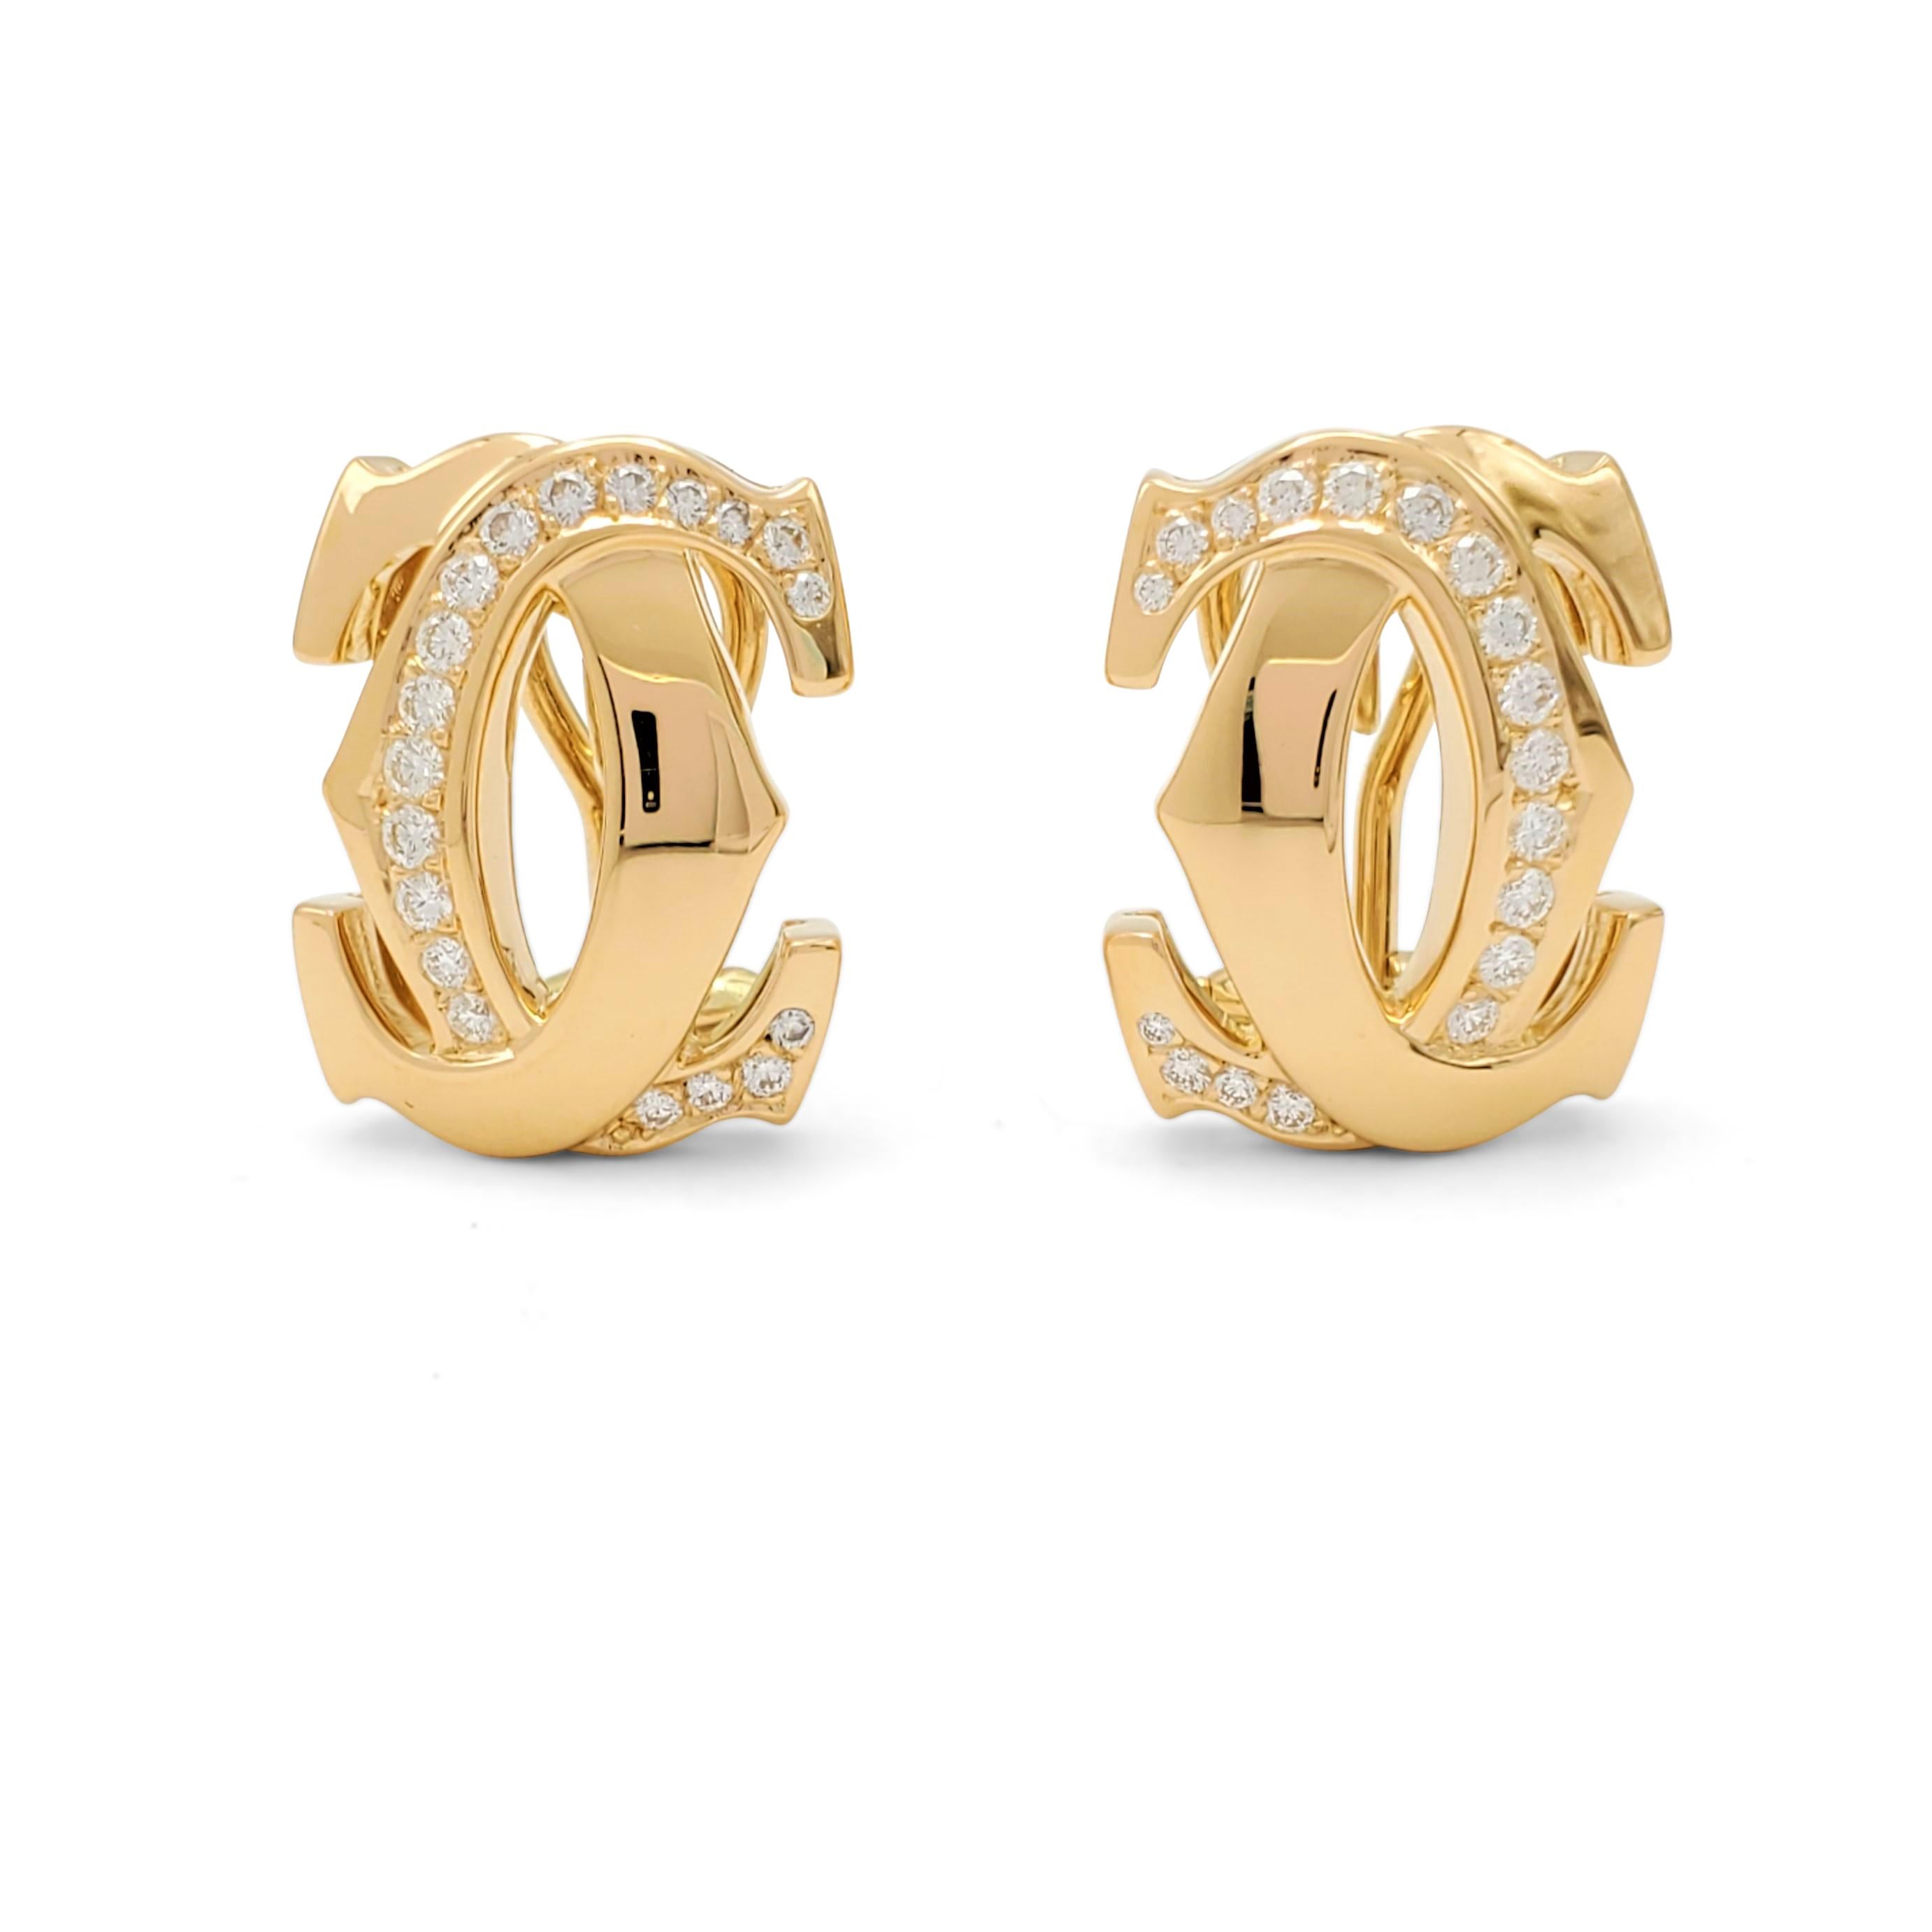 Authentic Cartier 'Penelope' earrings crafted in 18 karat yellow gold center on the iconic interlocking Cartier double-C motif. The earrings are set with an estimated 0.55 carats total weight of round brilliant cut diamonds (E-F color, VS clarity).